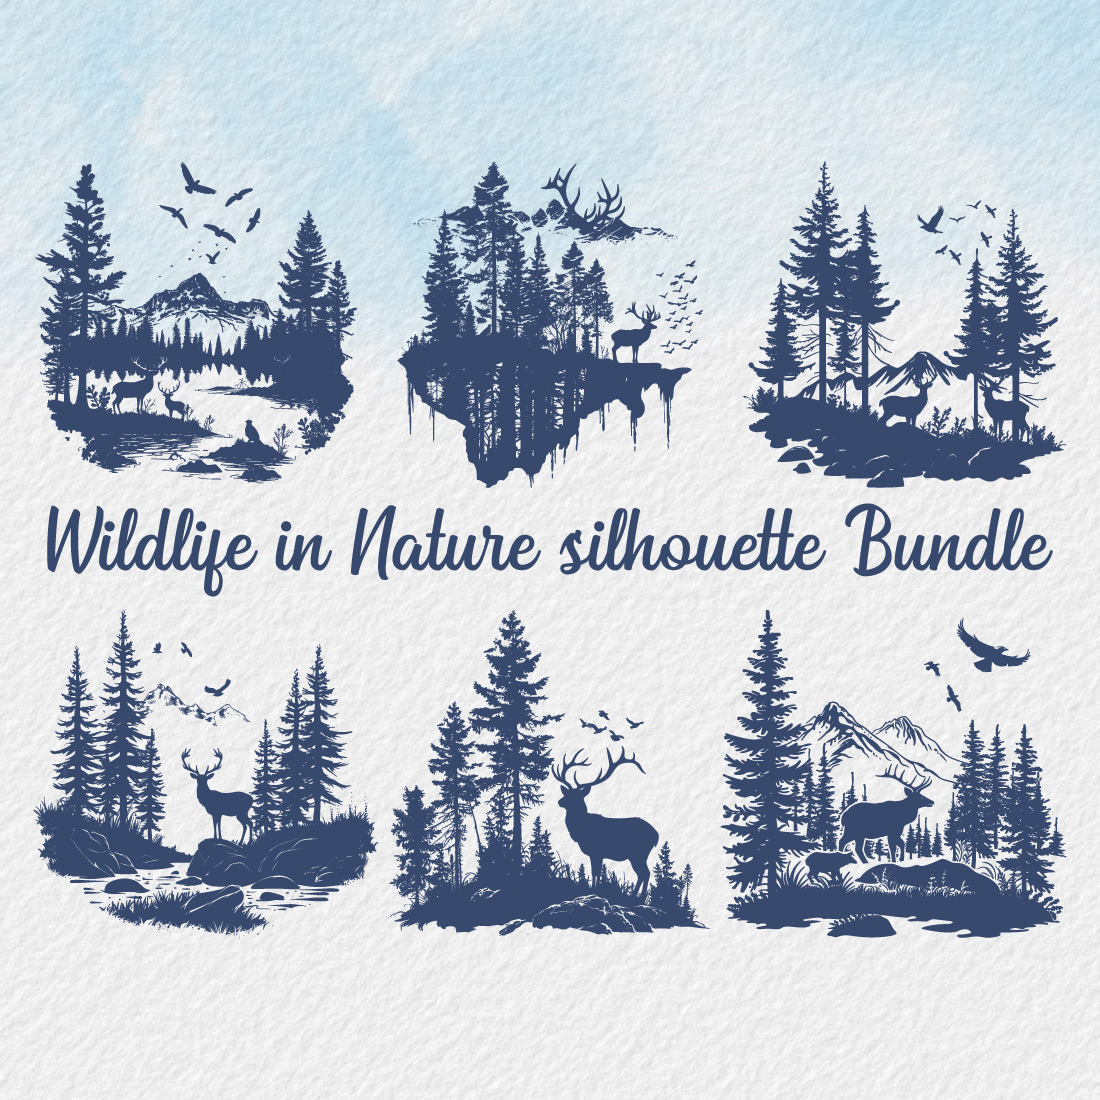 Wildlife in Nature Silhouette bundle, wild animal wildlife silhouette, forest silhouette illustration, Beautiful design for wildlife preservation, environmental awareness, deer, birds, bears trees, mountains preview image.